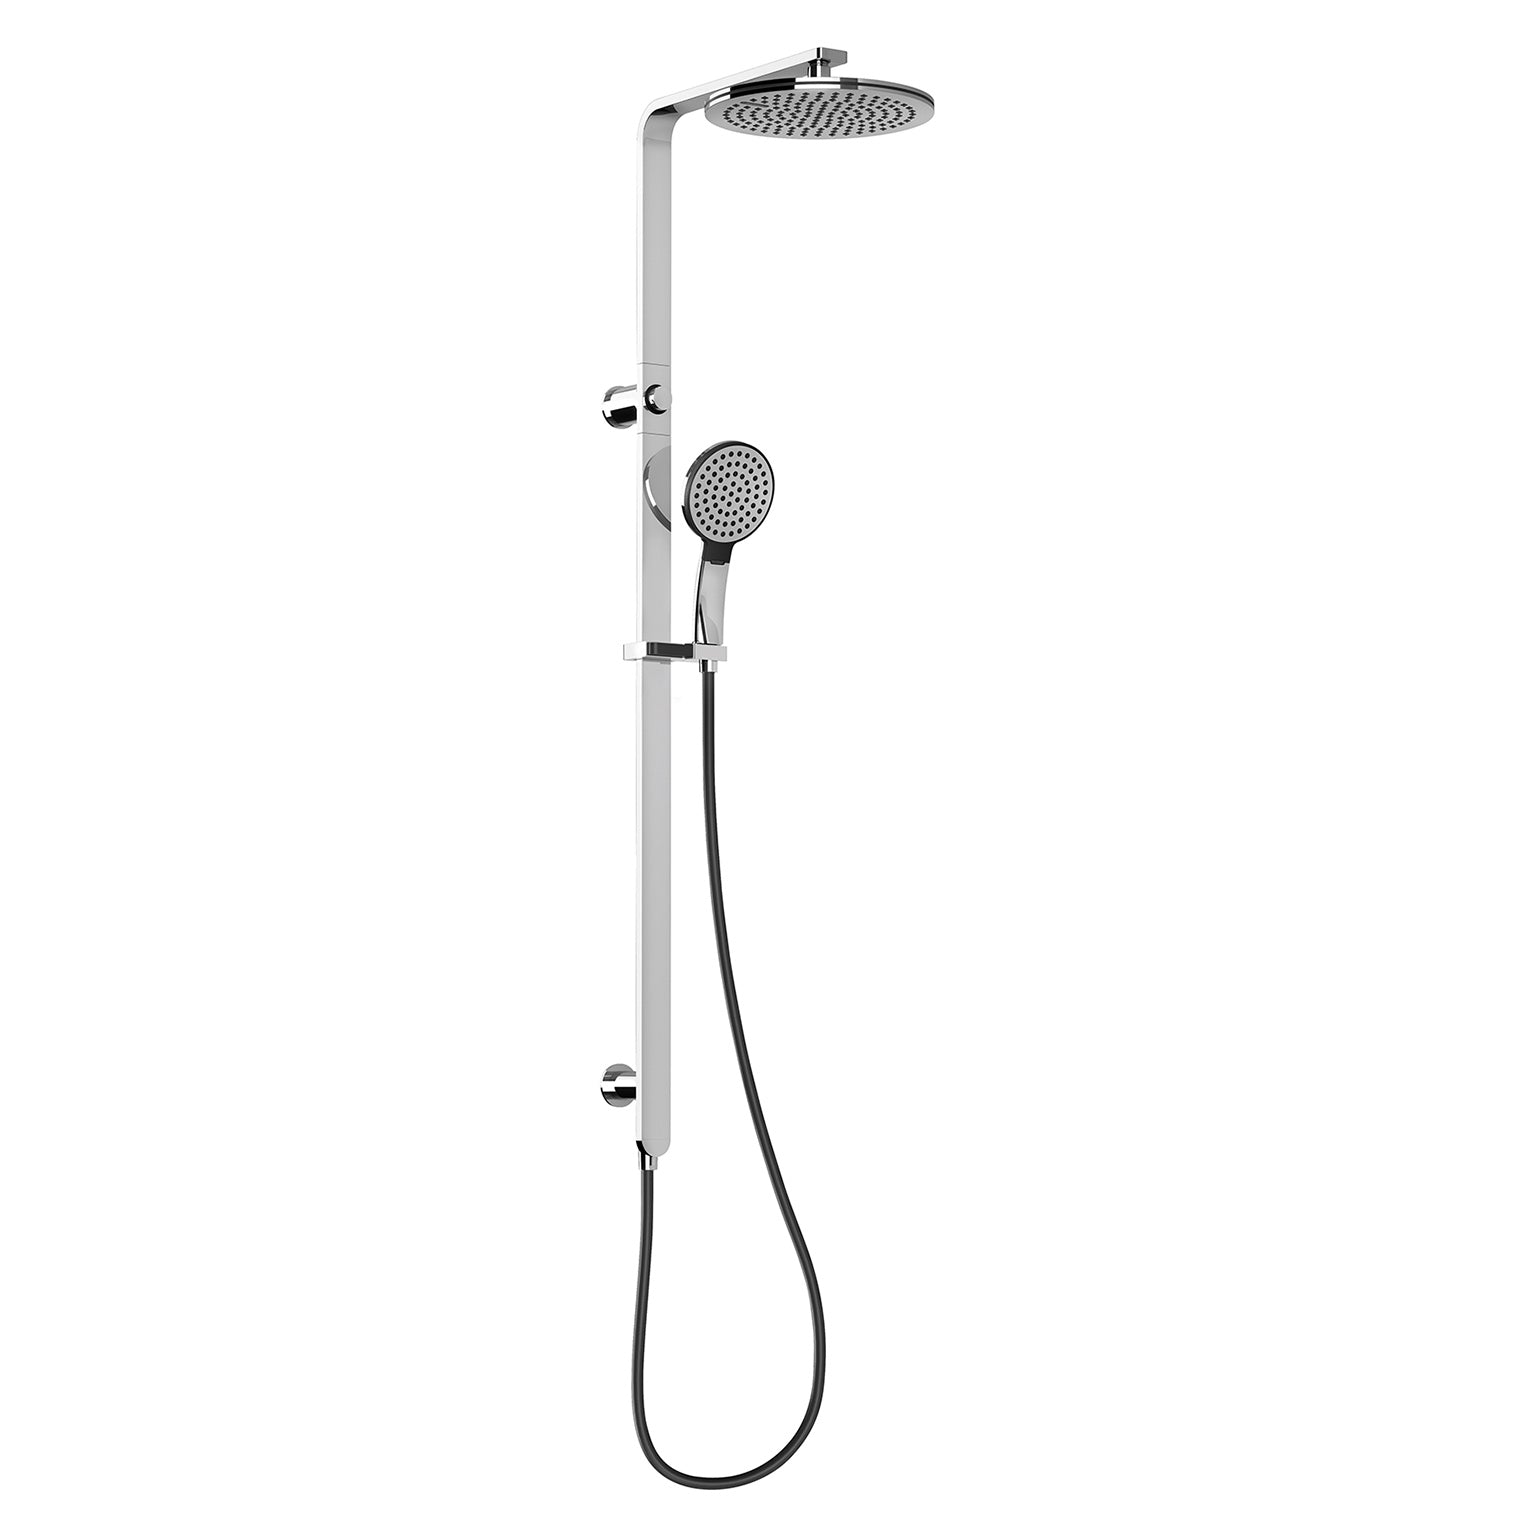 PHOENIX NX QUIL TWIN SHOWER CHROME AND MATTE BLACK